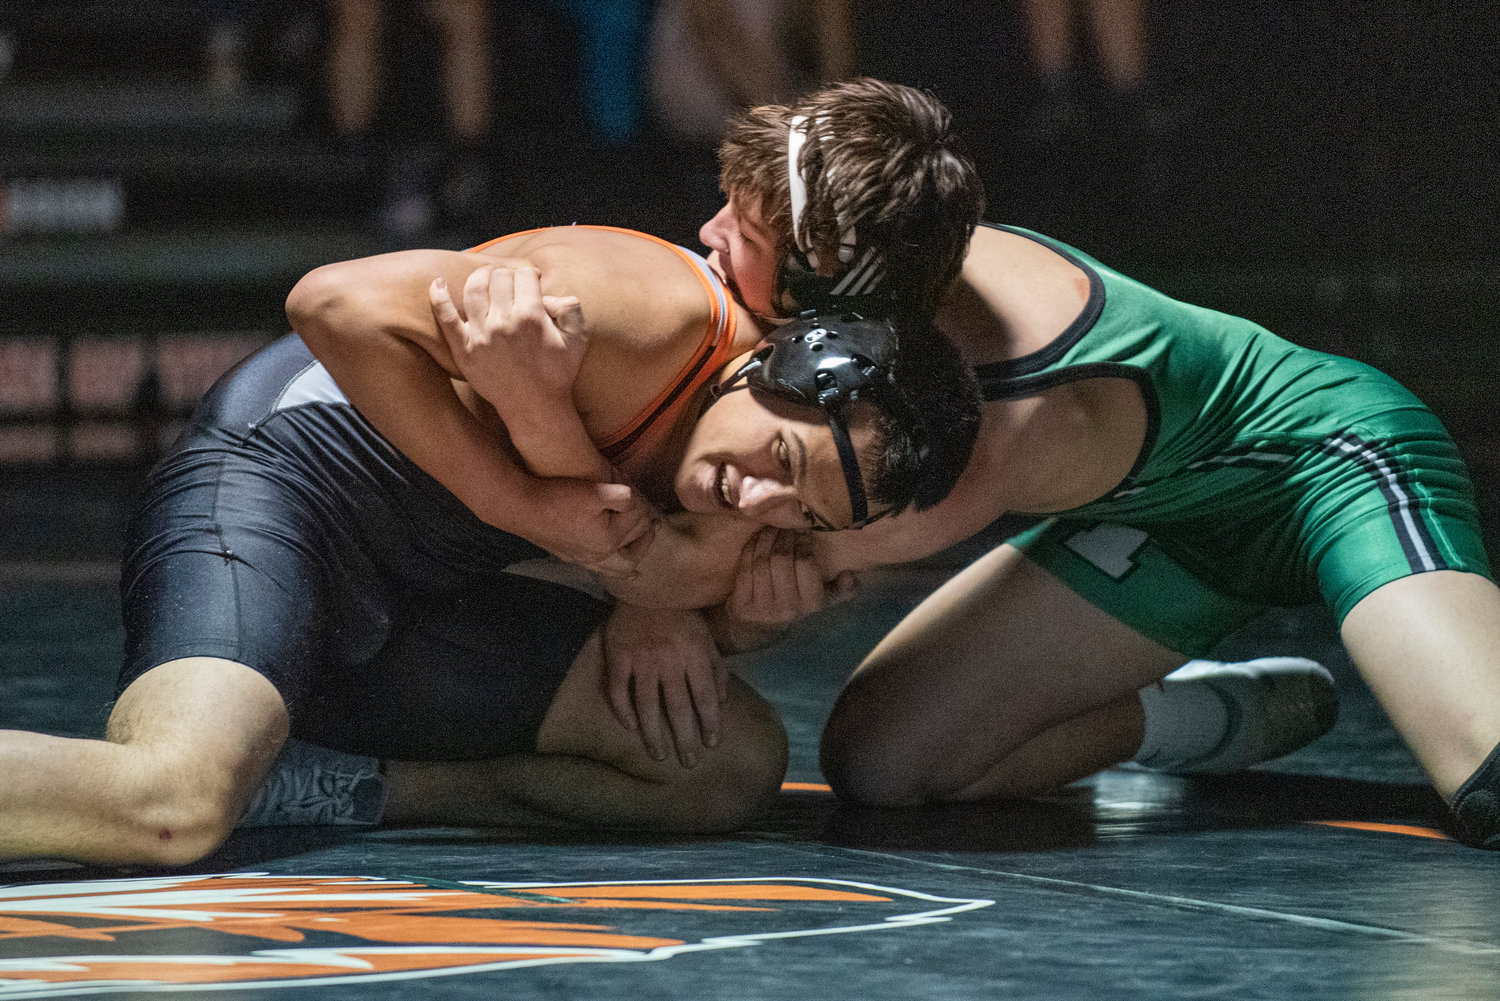 Centralia senior Julian Gruginski, left, grapples with a Tumwater wrestlers at 170 pounds during a dual match in Centralia on Jan. 5.